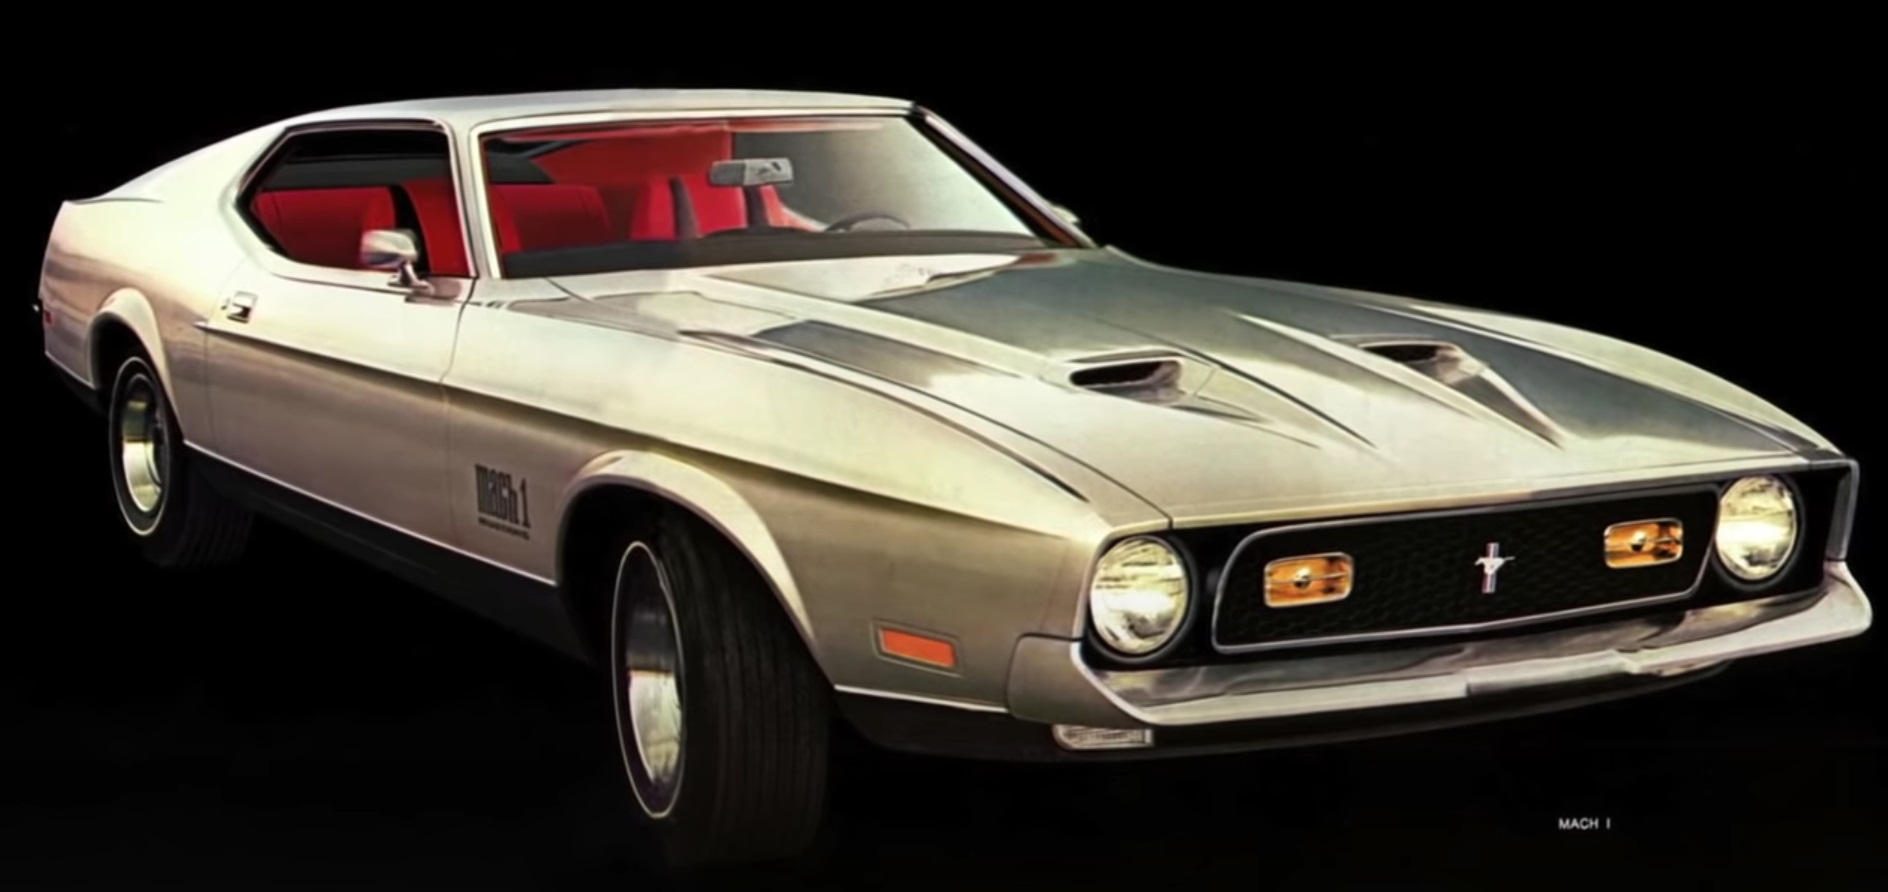 Video: The Story Behind The Development Of The 1974 Ford Mustang